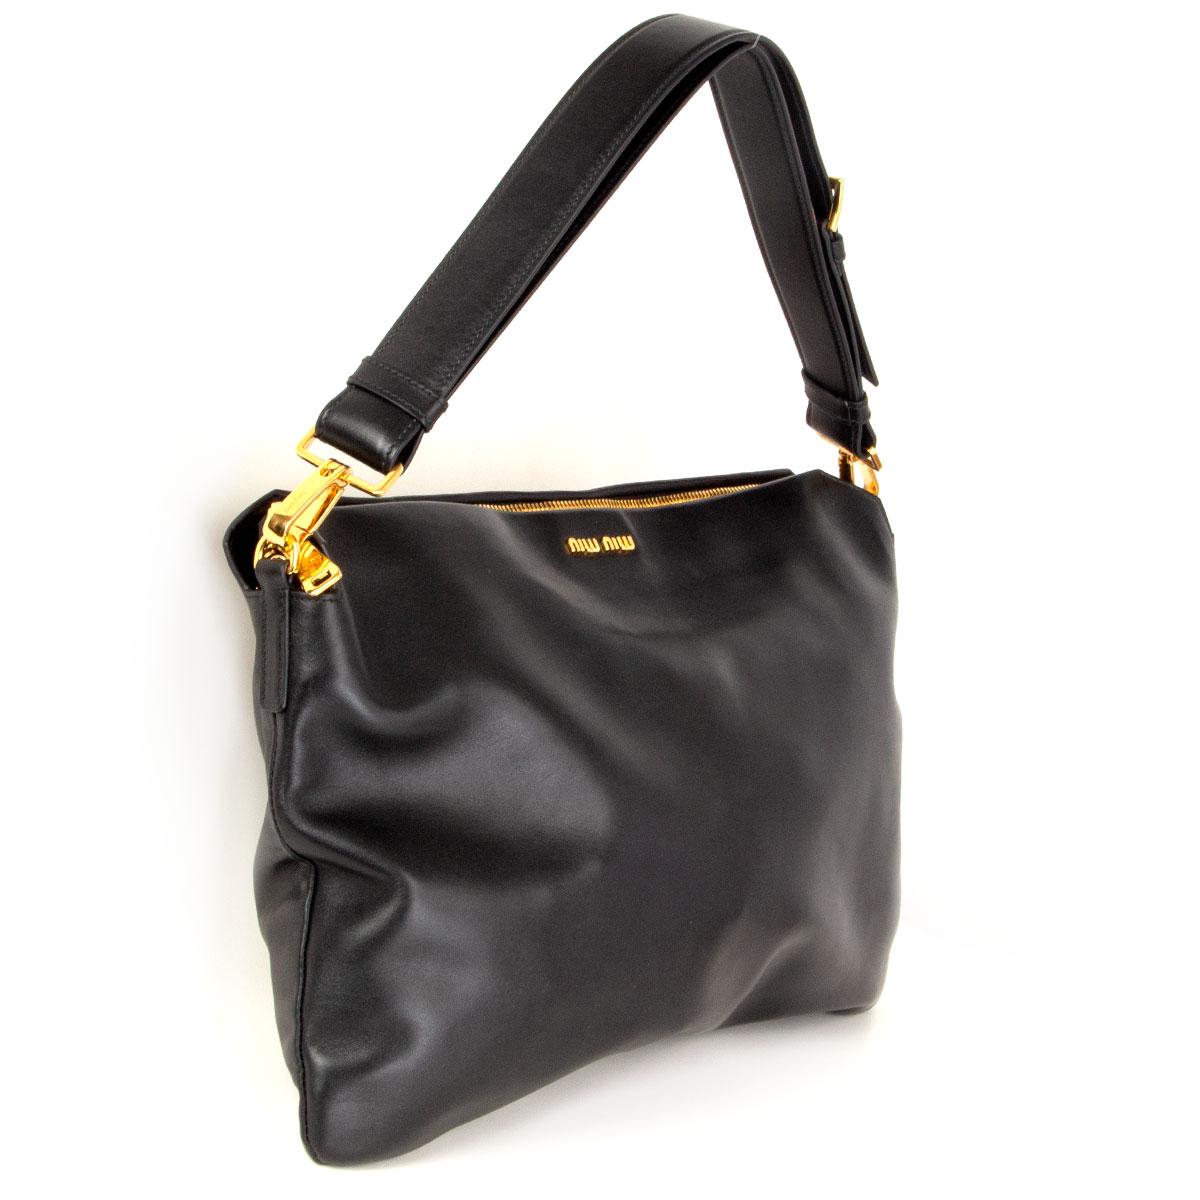 100% authentic Miu Miu 'Cloud' hobo bag in Nero (black) Soft Calf leather featuring gold-tone hardware. Opens with a chunky zipper on top and is lined in red and black leather with one zipper pocket against the back and one open pocket against the